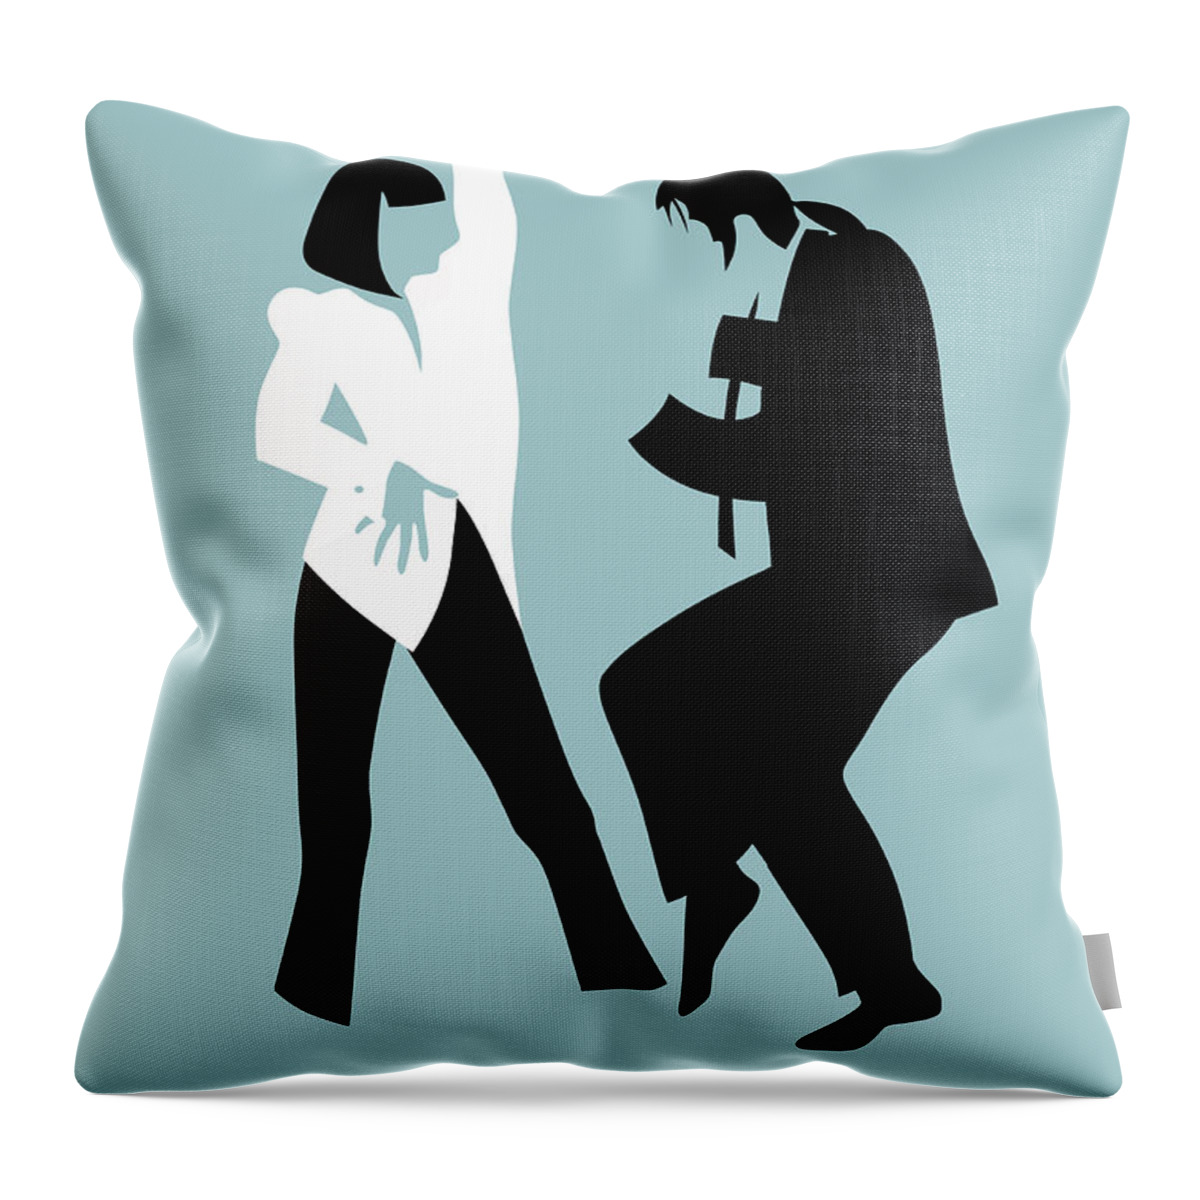 Pulp Fiction Throw Pillow featuring the painting Dance Good Poster 1 by Naxart Studio